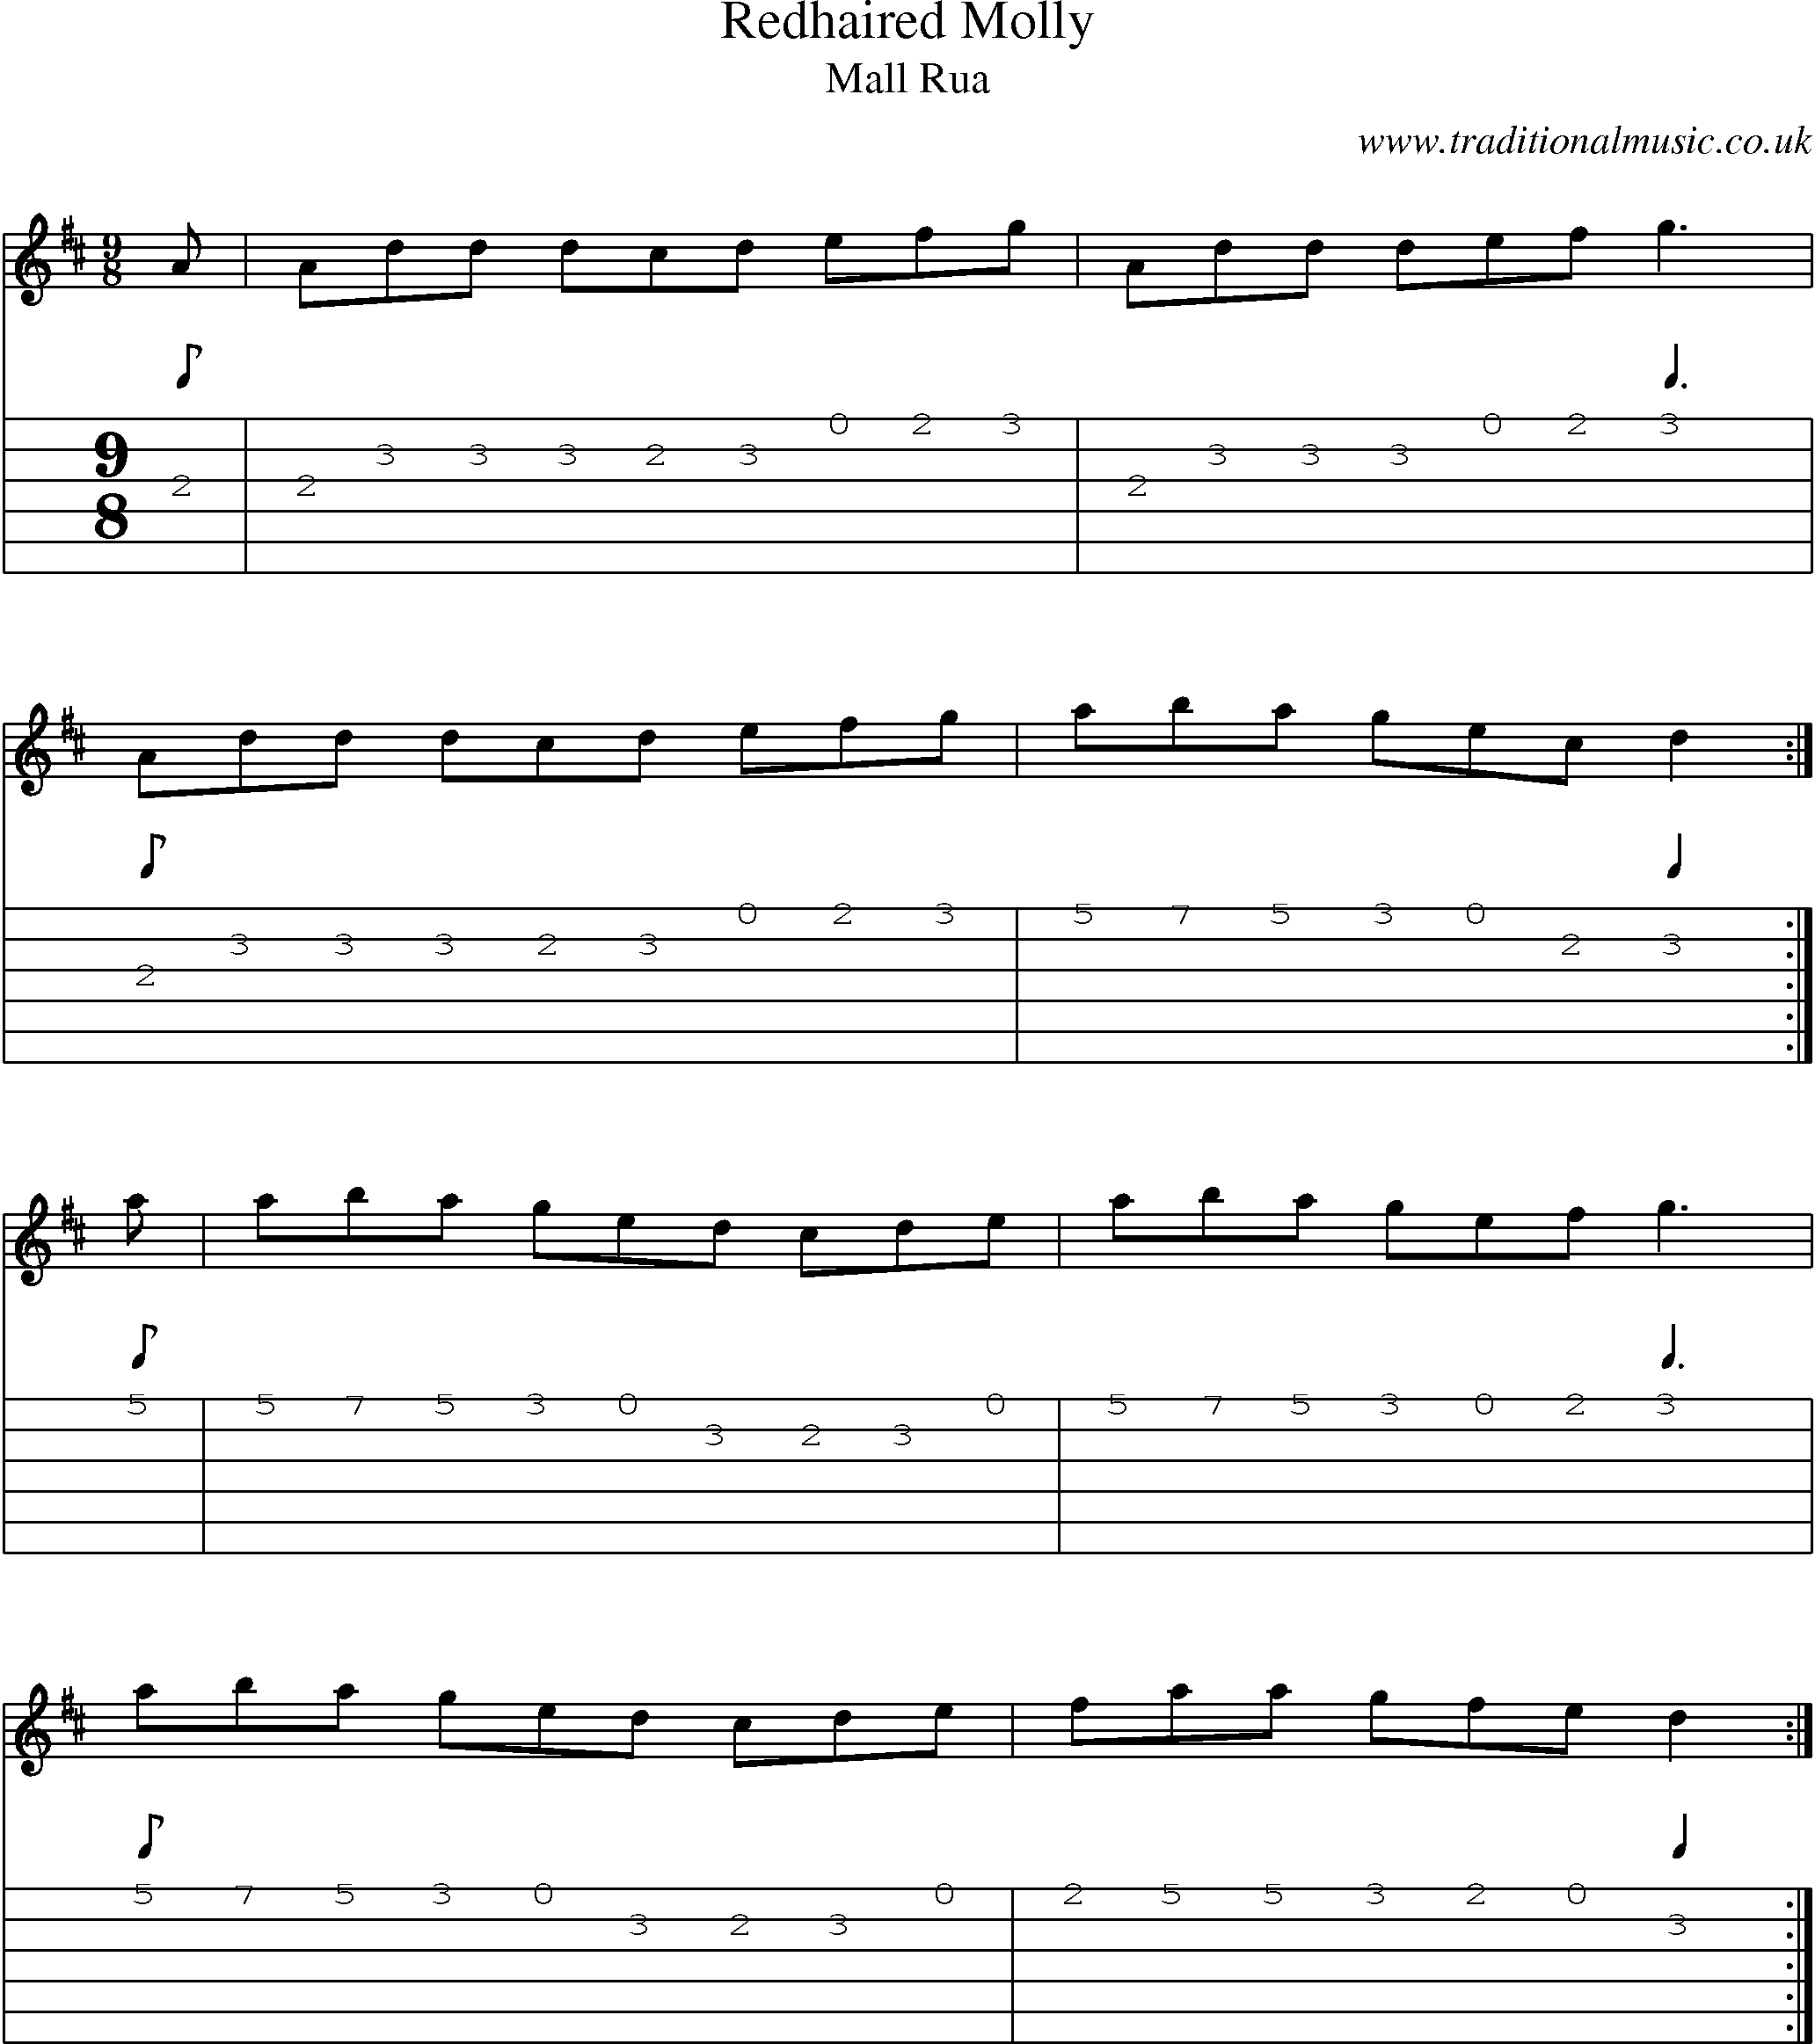 Music Score and Guitar Tabs for Redhaired Molly